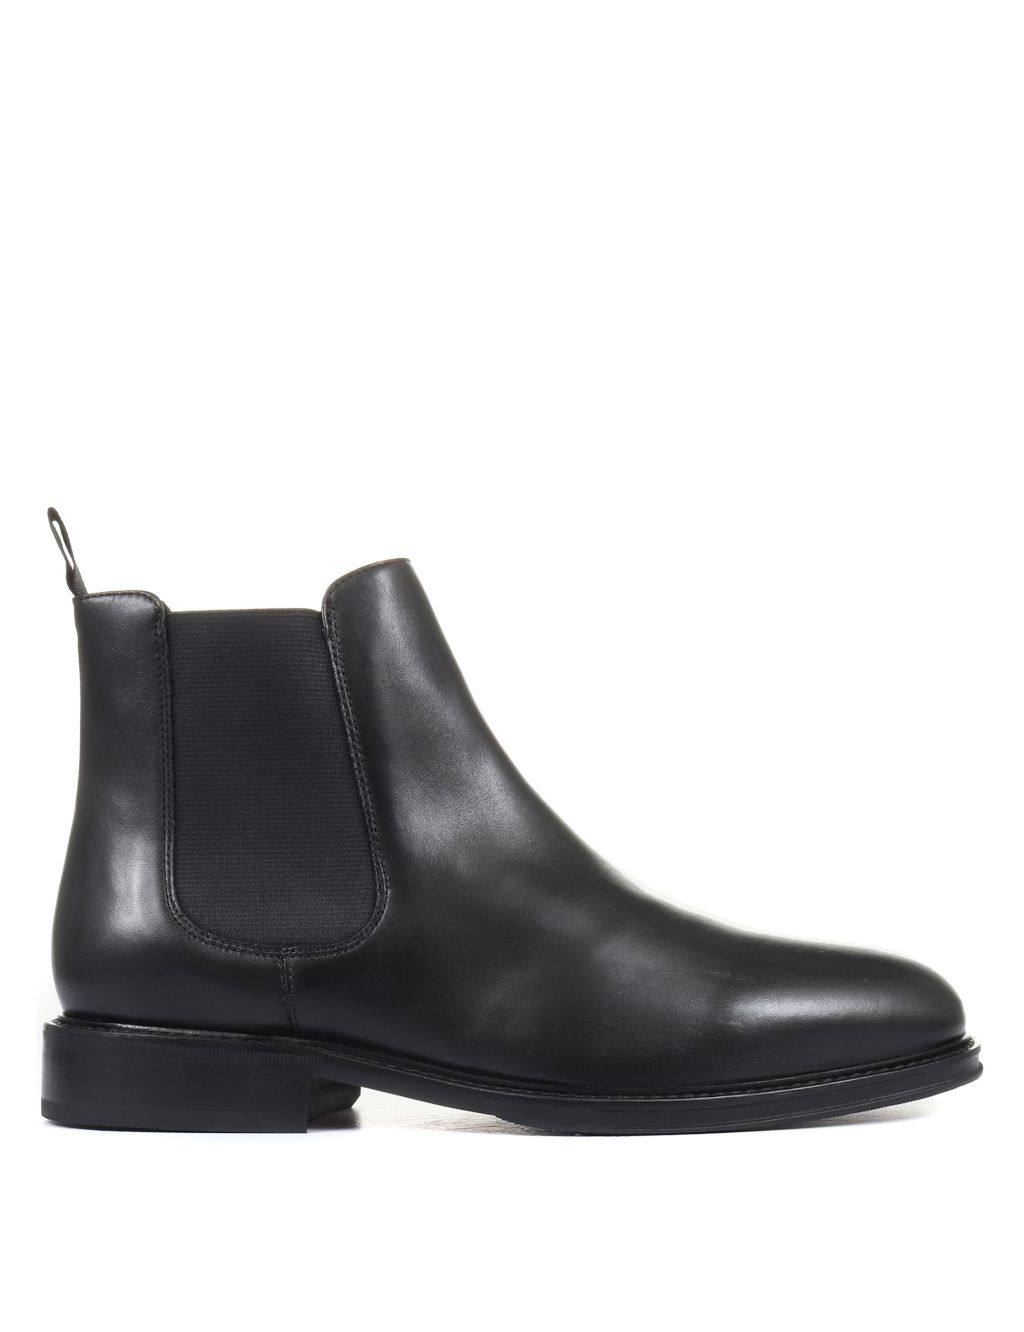 Leather Pull-On Chelsea Boots image 5